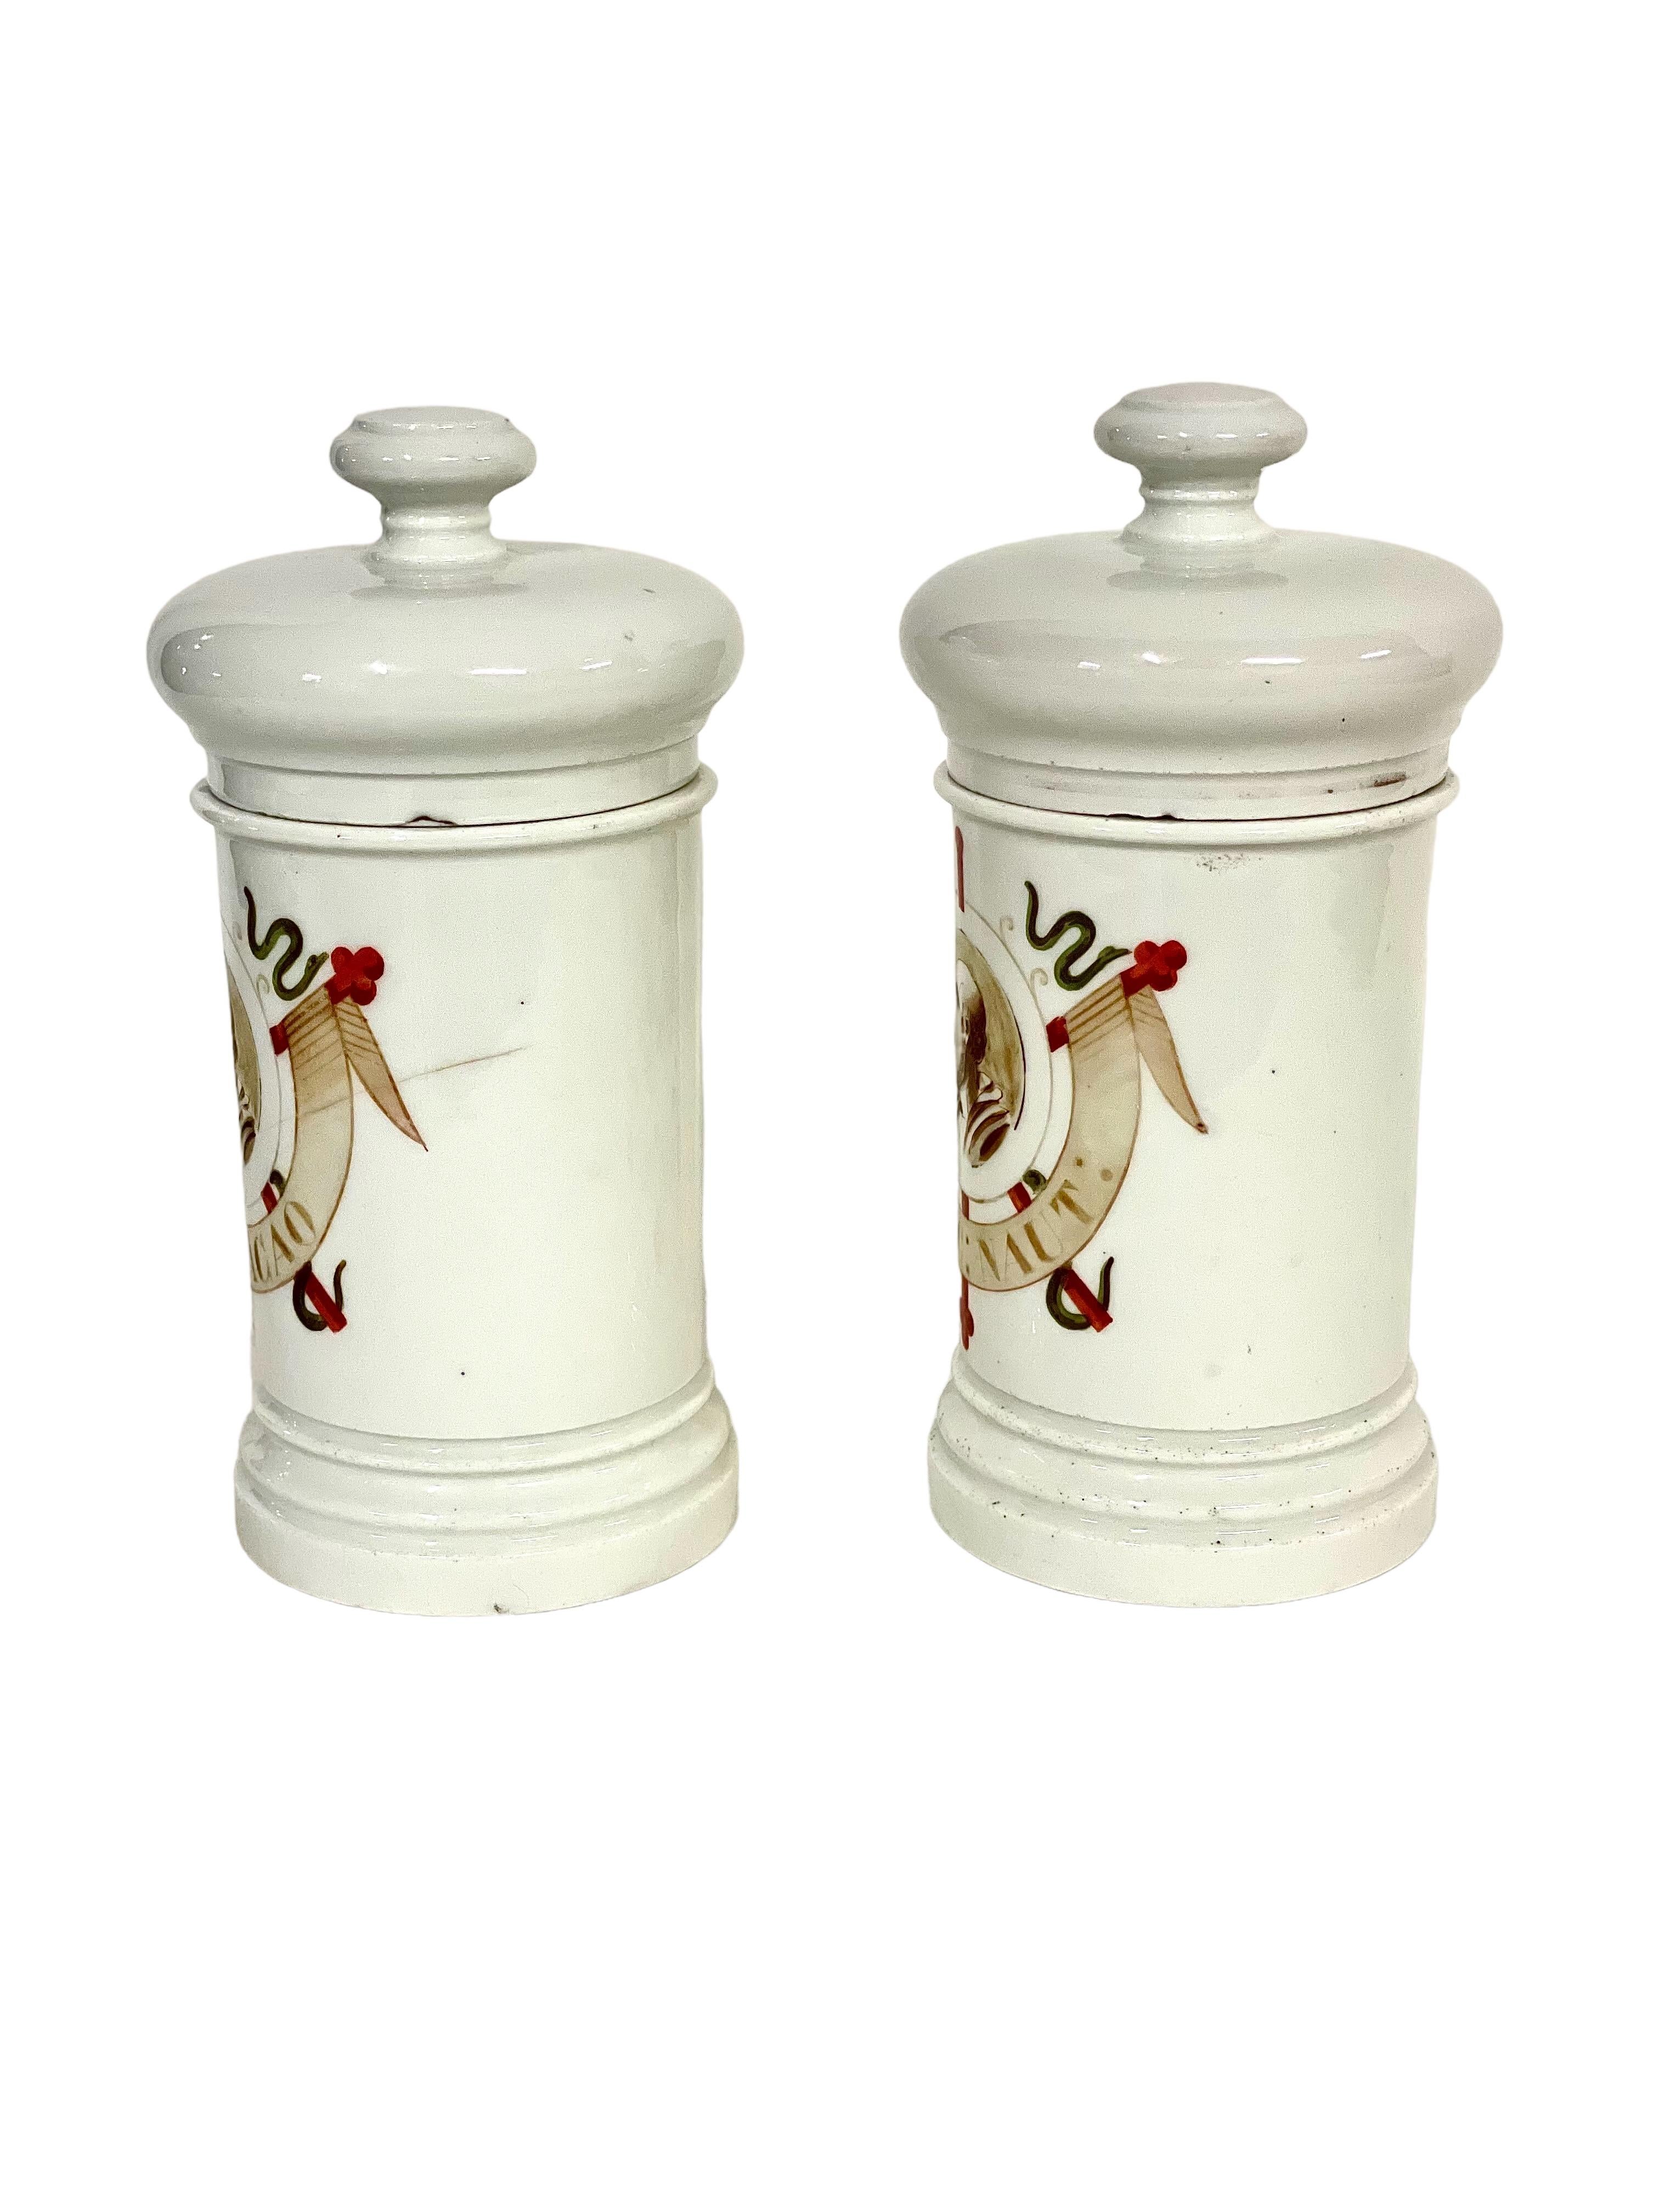 A beautiful pair of antique 19th-century French porcelain lidded apothecary or pharmacy jars, with elegant hand-painted decoration and lettering, and maker's mark on the base. A depiction of the ancient Greek physician Hippocrates is emblazoned on